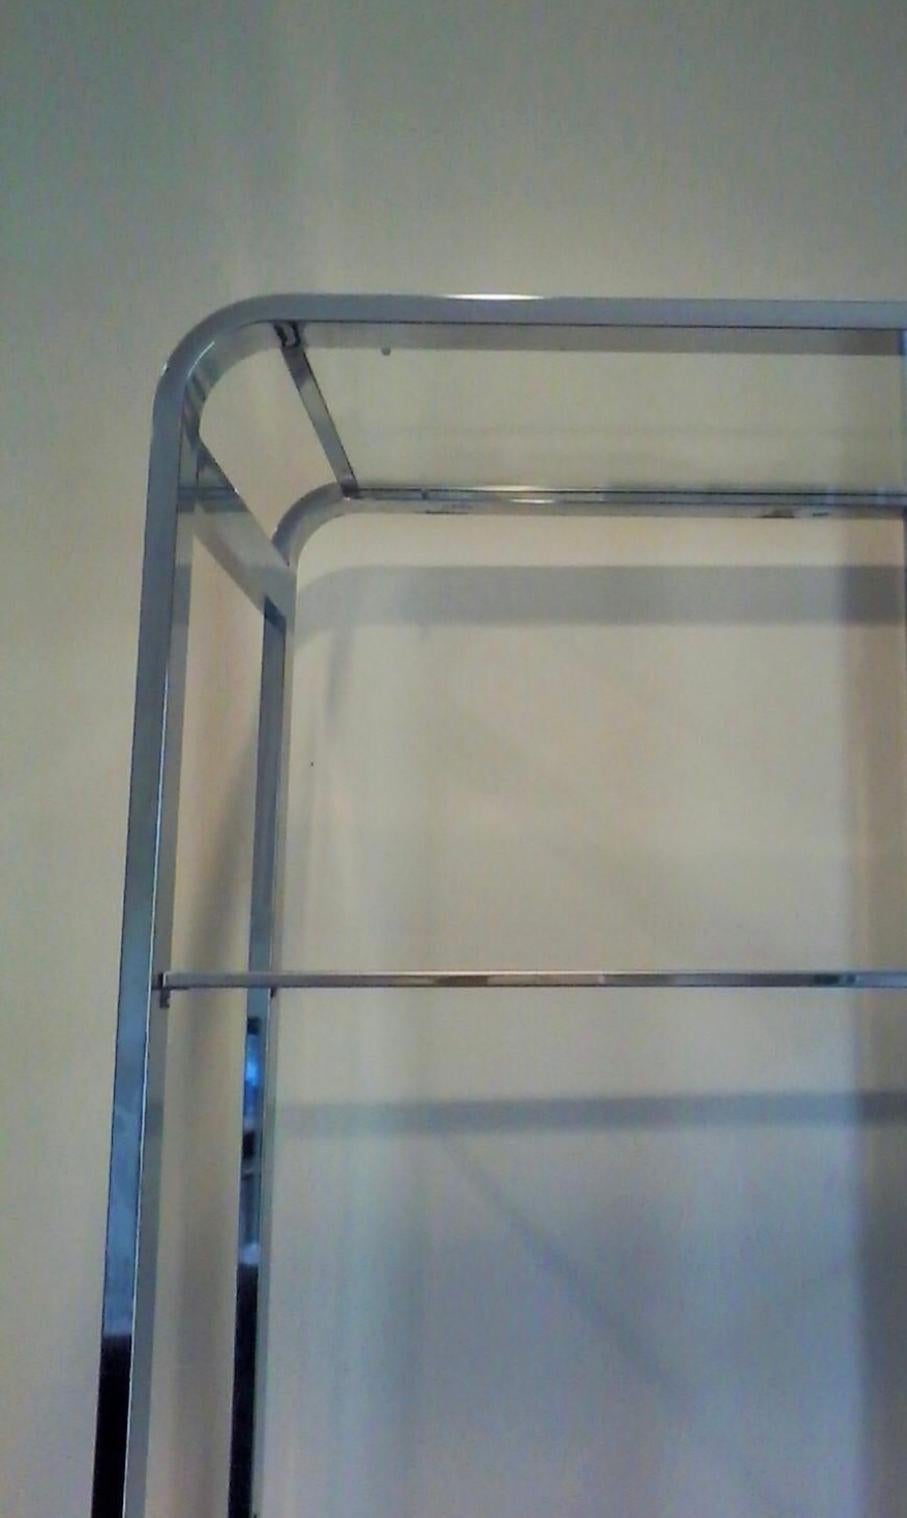 Fantastic chrome metal étagère by the uber-loved Baughman. Flat bar construction is sleek and minimalistic. All glass is present. Not flimsy or “tinny”, a substantial piece to own.
